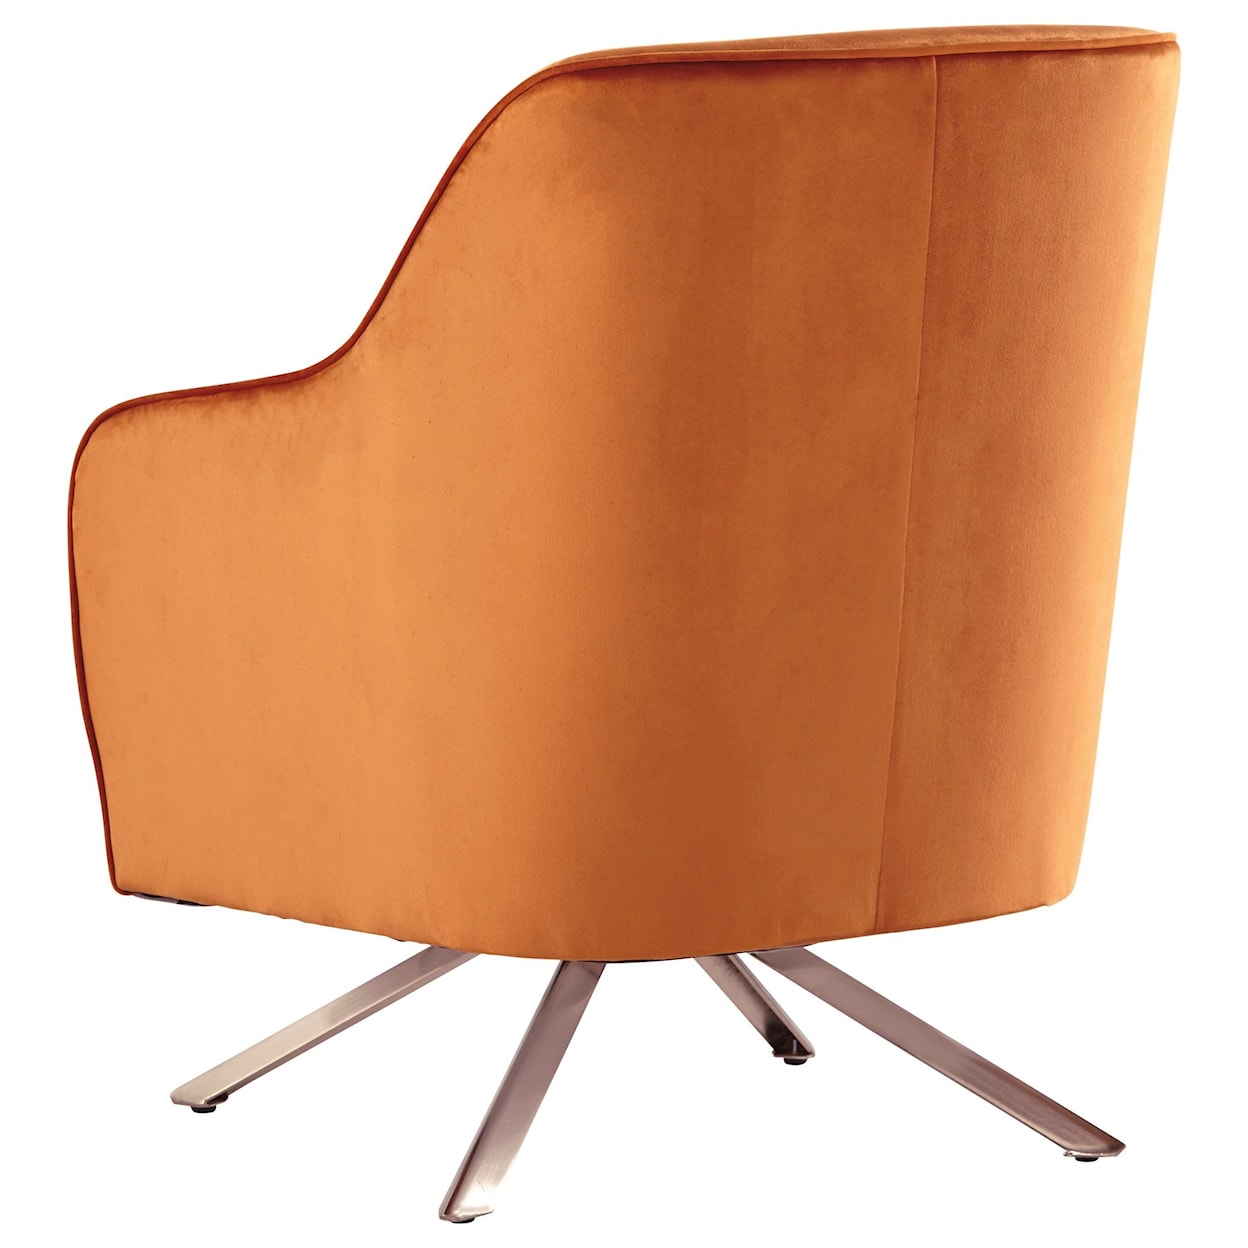 Signature Design by Ashley Furniture Hangar Accent Chair